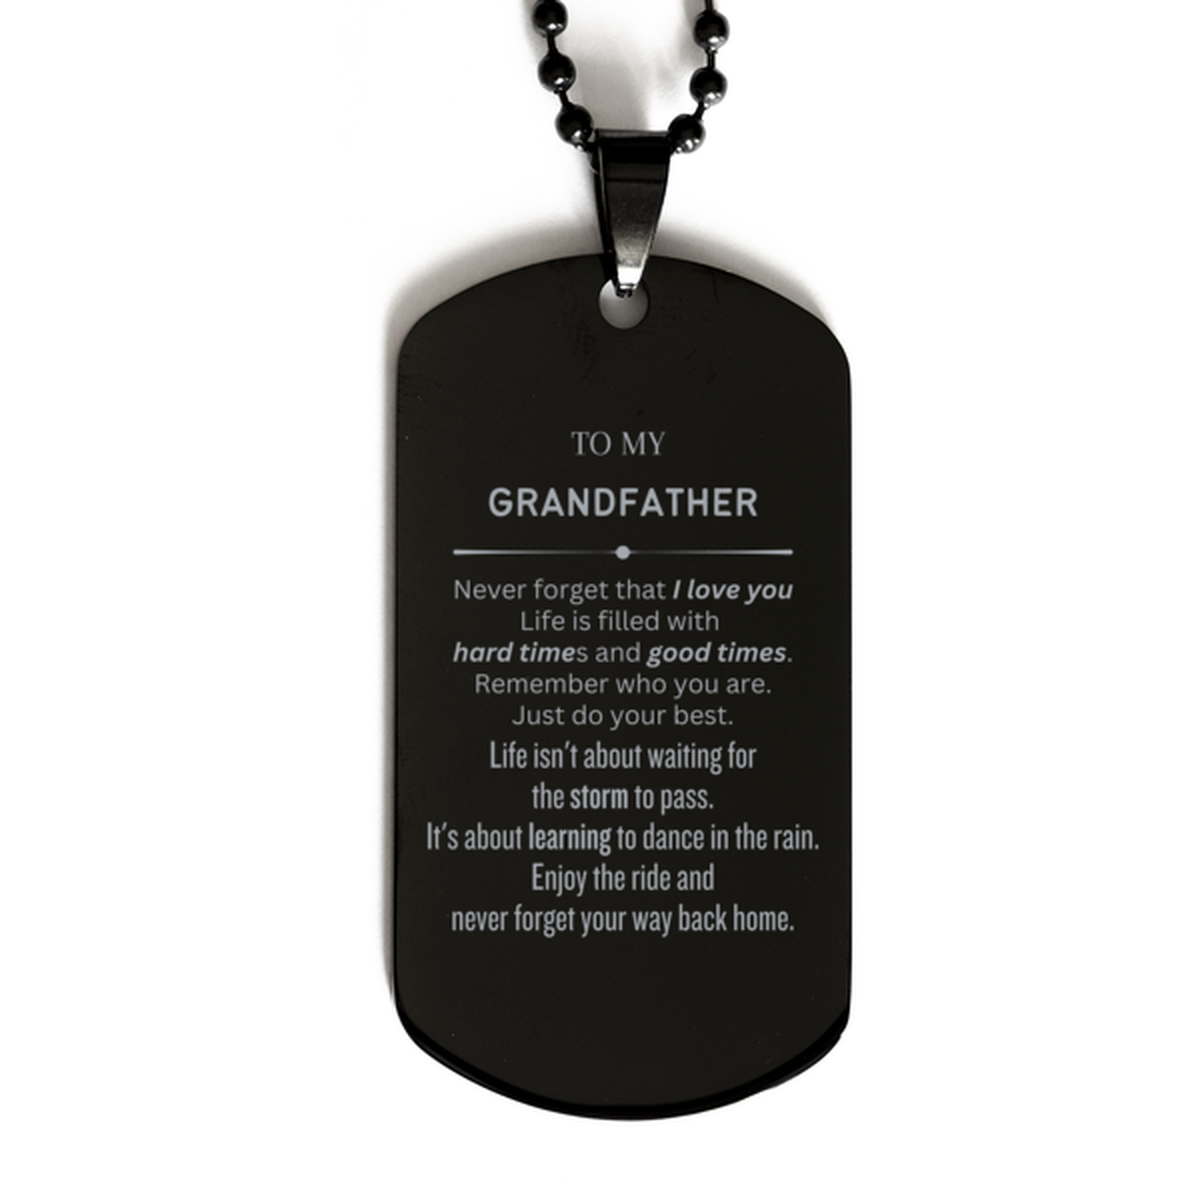 Christmas Grandfather Black Dog Tag Gifts, To My Grandfather Birthday Thank You Gifts For Grandfather, Graduation Unique Gifts For Grandfather To My Grandfather Never forget that I love you life is filled with hard times and good times. Remember who you a